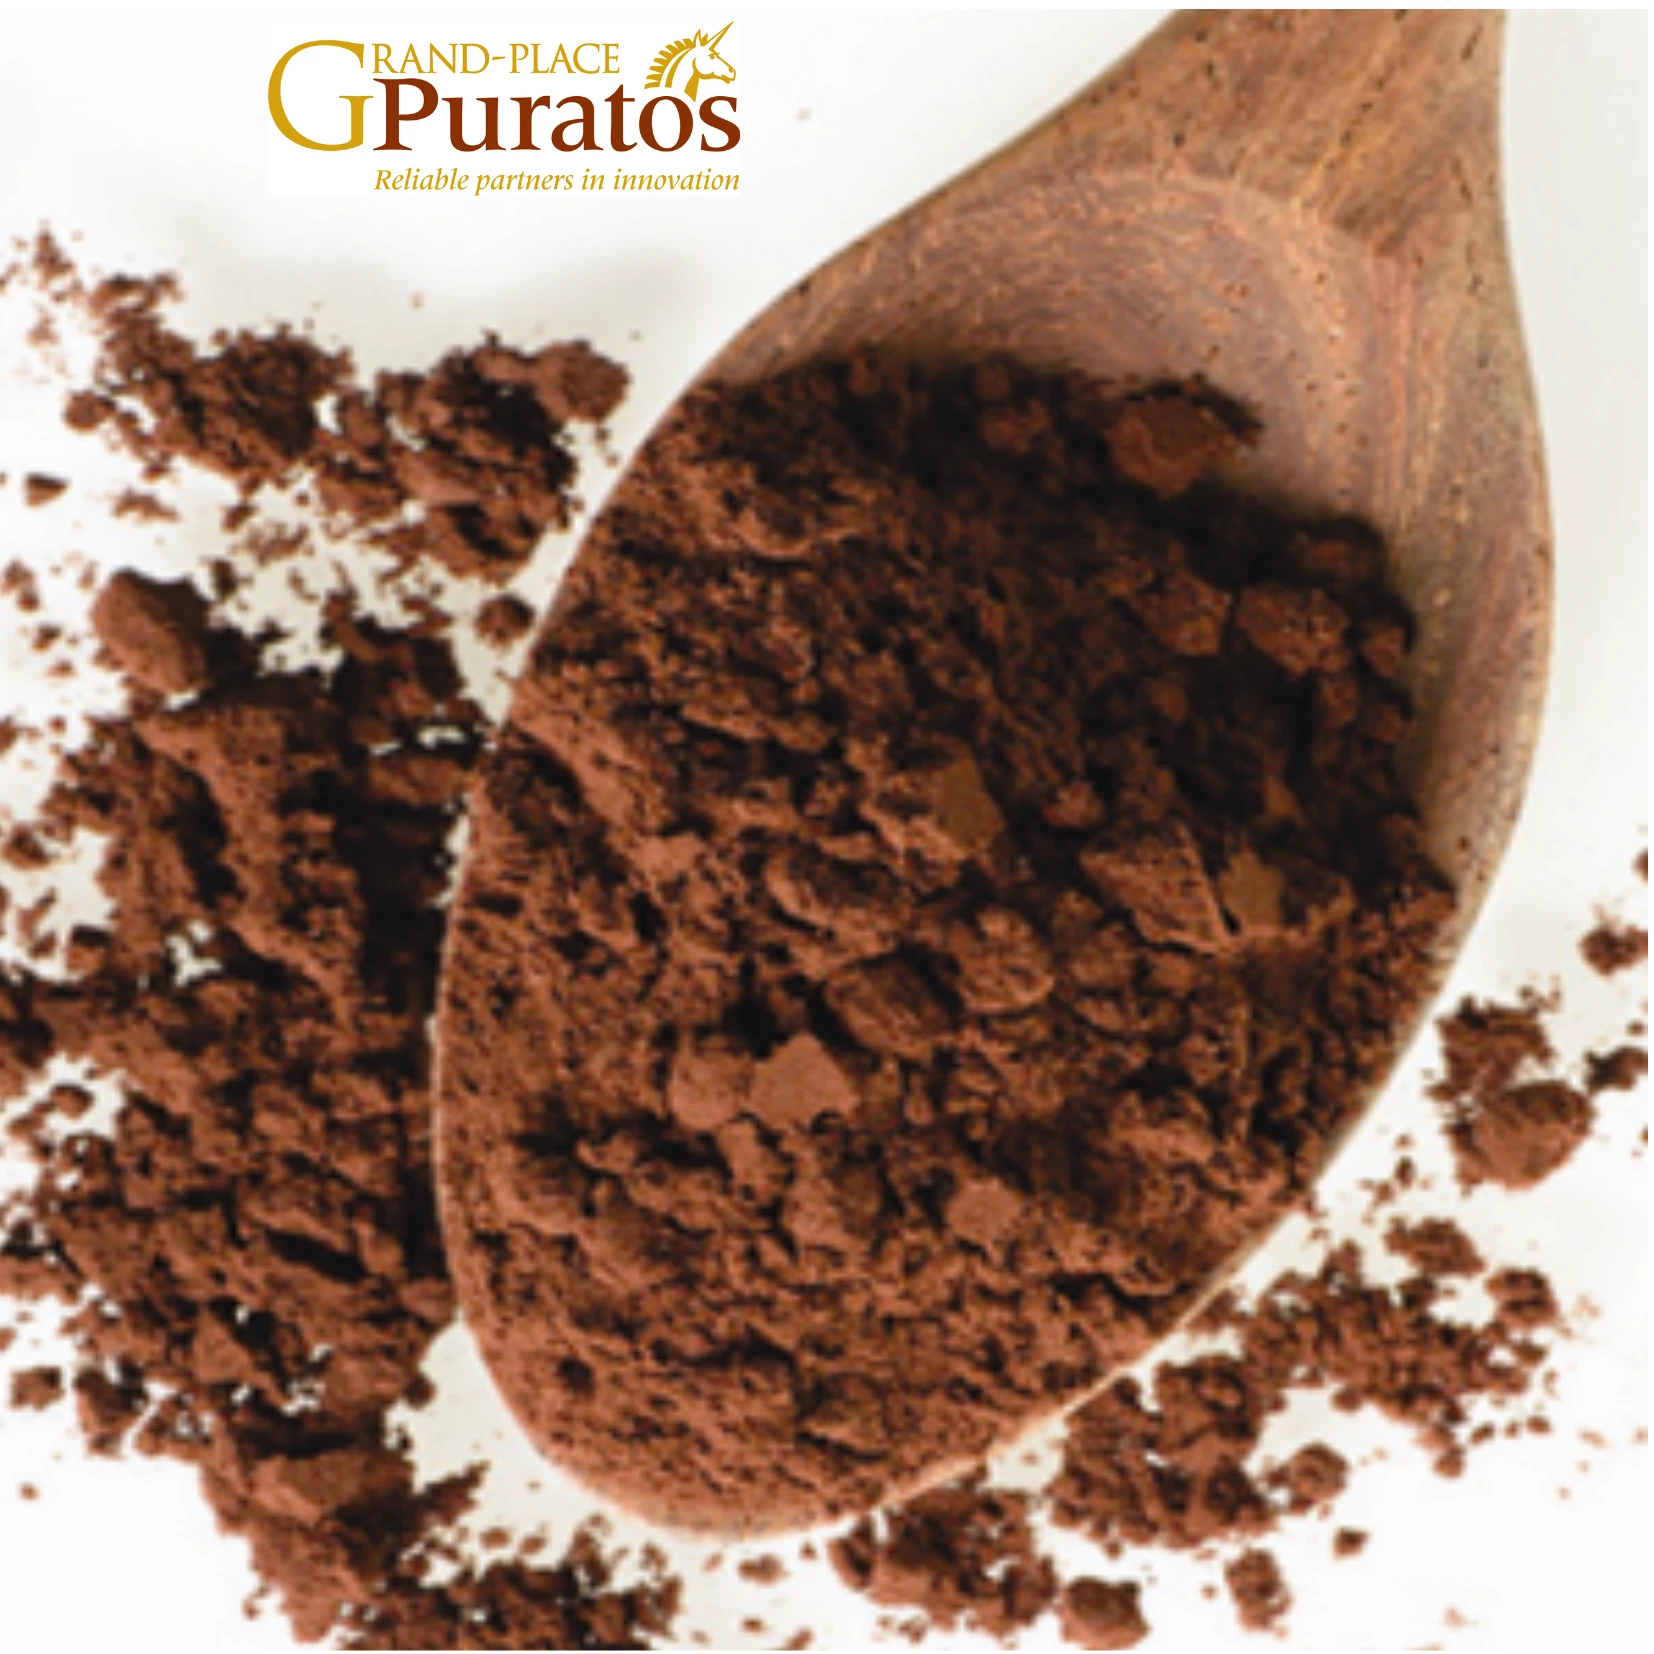 Premium Dutched Cocoa Powder - CacaoTrace Cocoa Ingredients